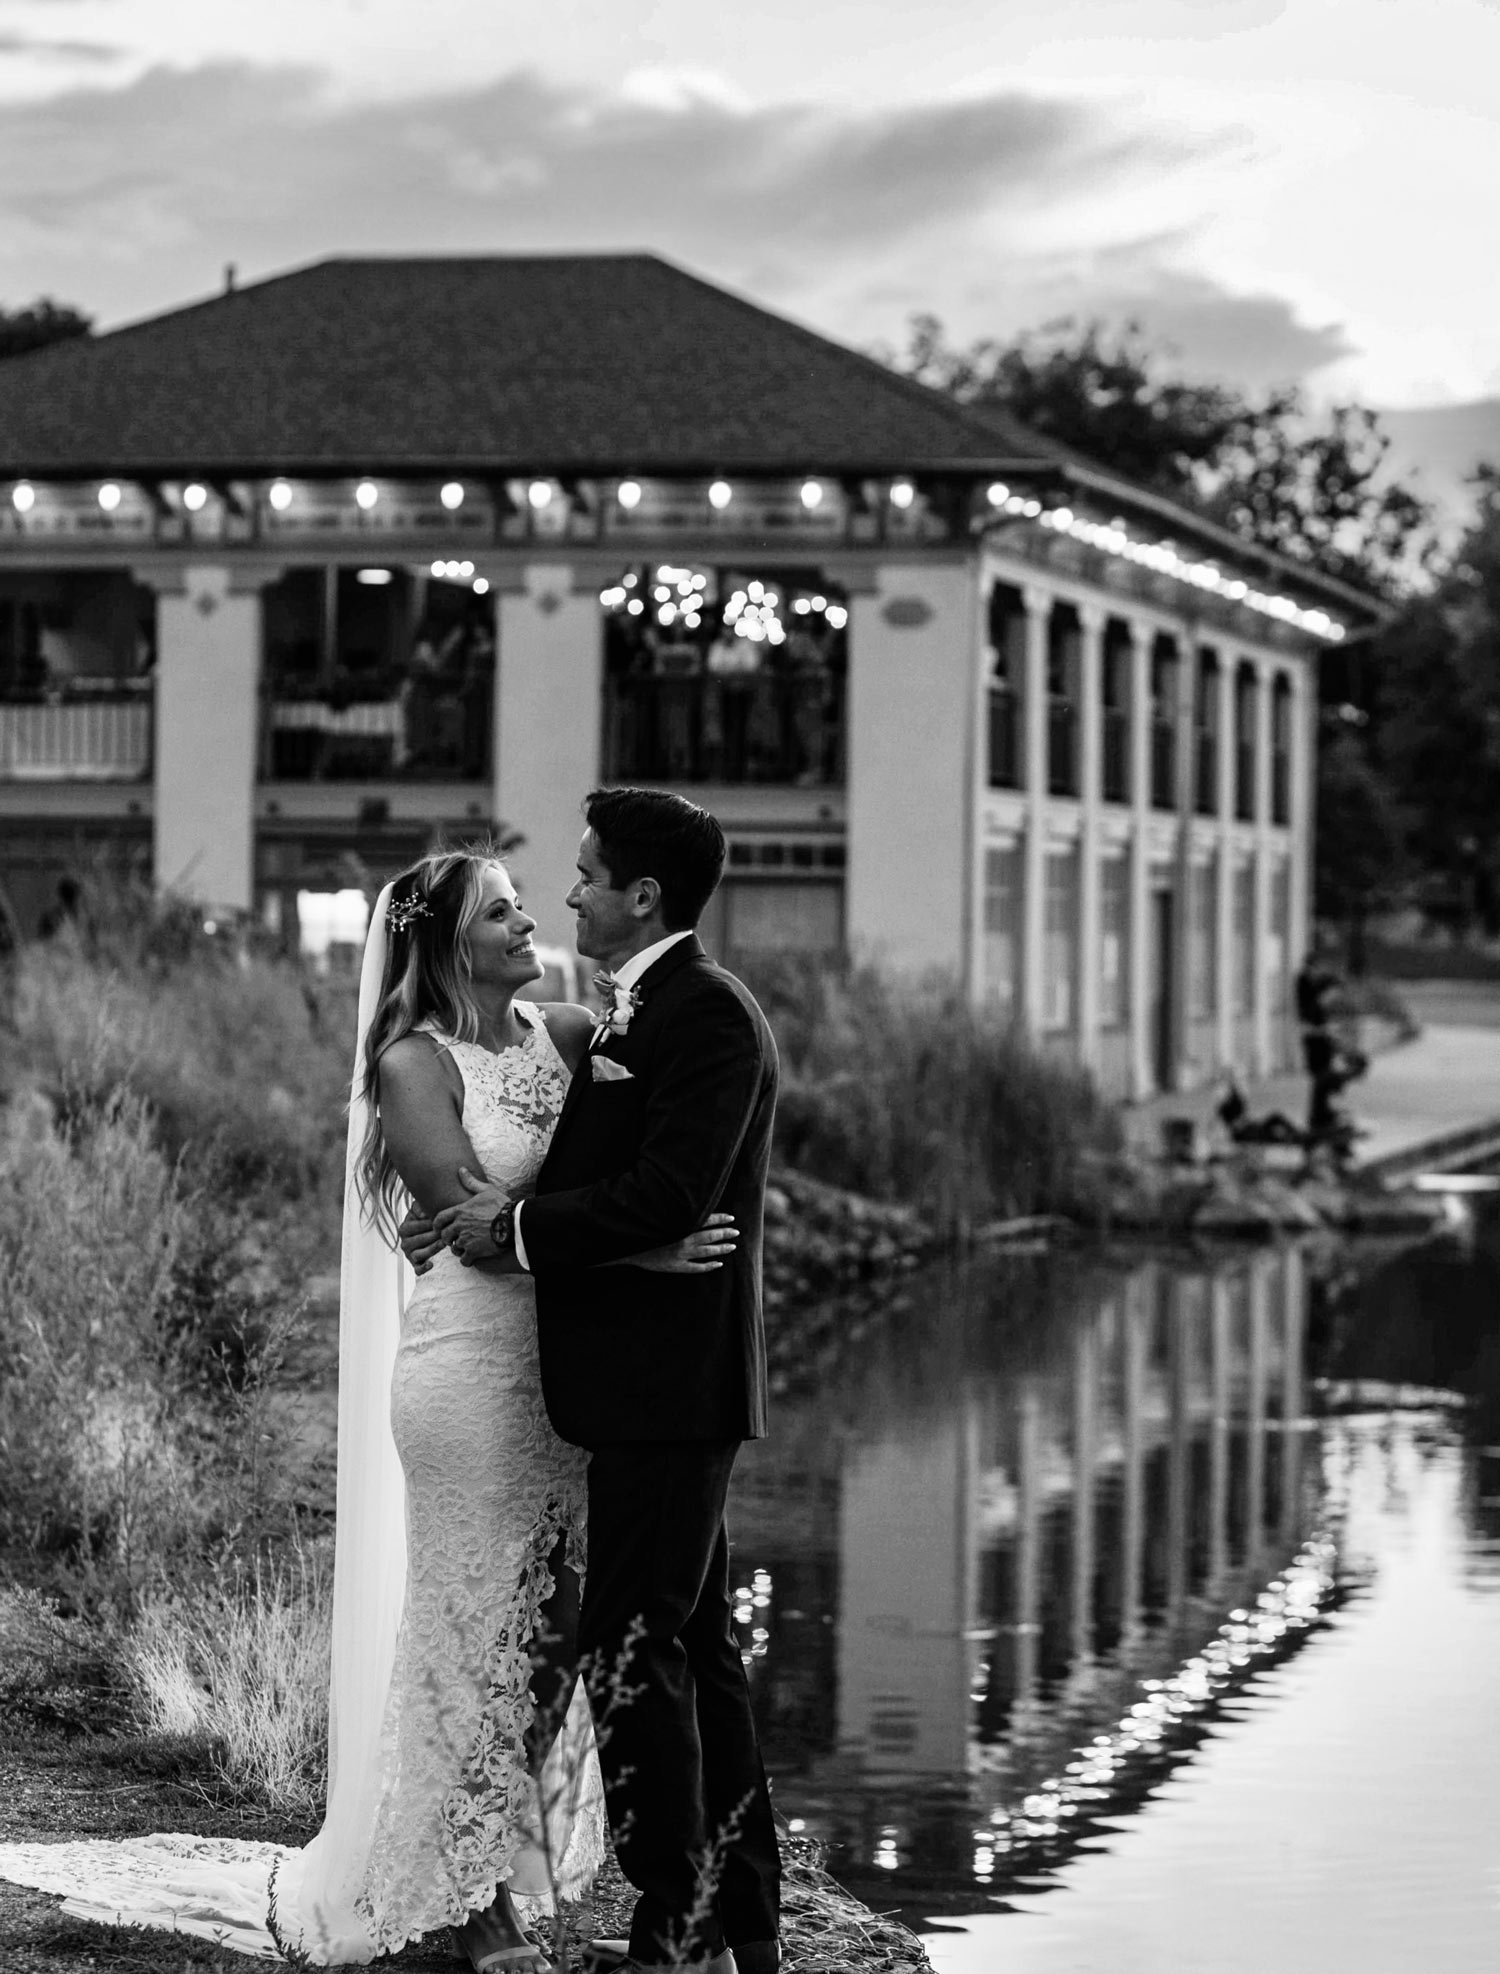 Gina Fidler and her husband kiss in front of the boathouse at Wash Park on their wedding day | Wash Park Health | Simple, Convenient, Personalized Healthcare in Wash Park, Denver